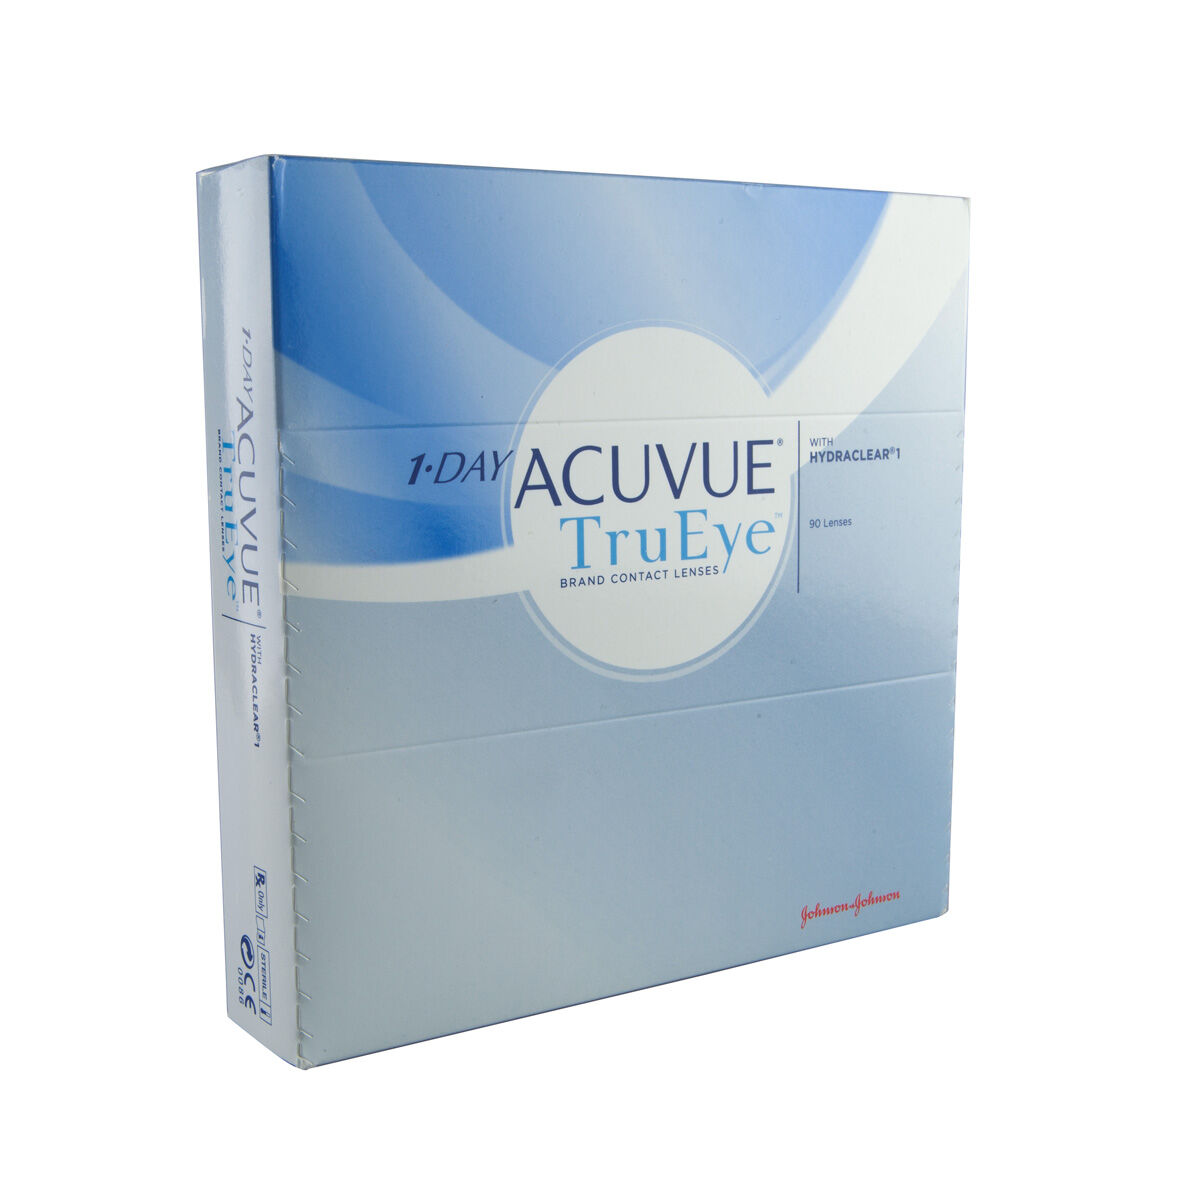 Acuvue 1 Day Acuvue Trueye (90 Contact Lenses), Johnson & Johnson Silicone Hydrogel Daily Lenses, Narafilcon A